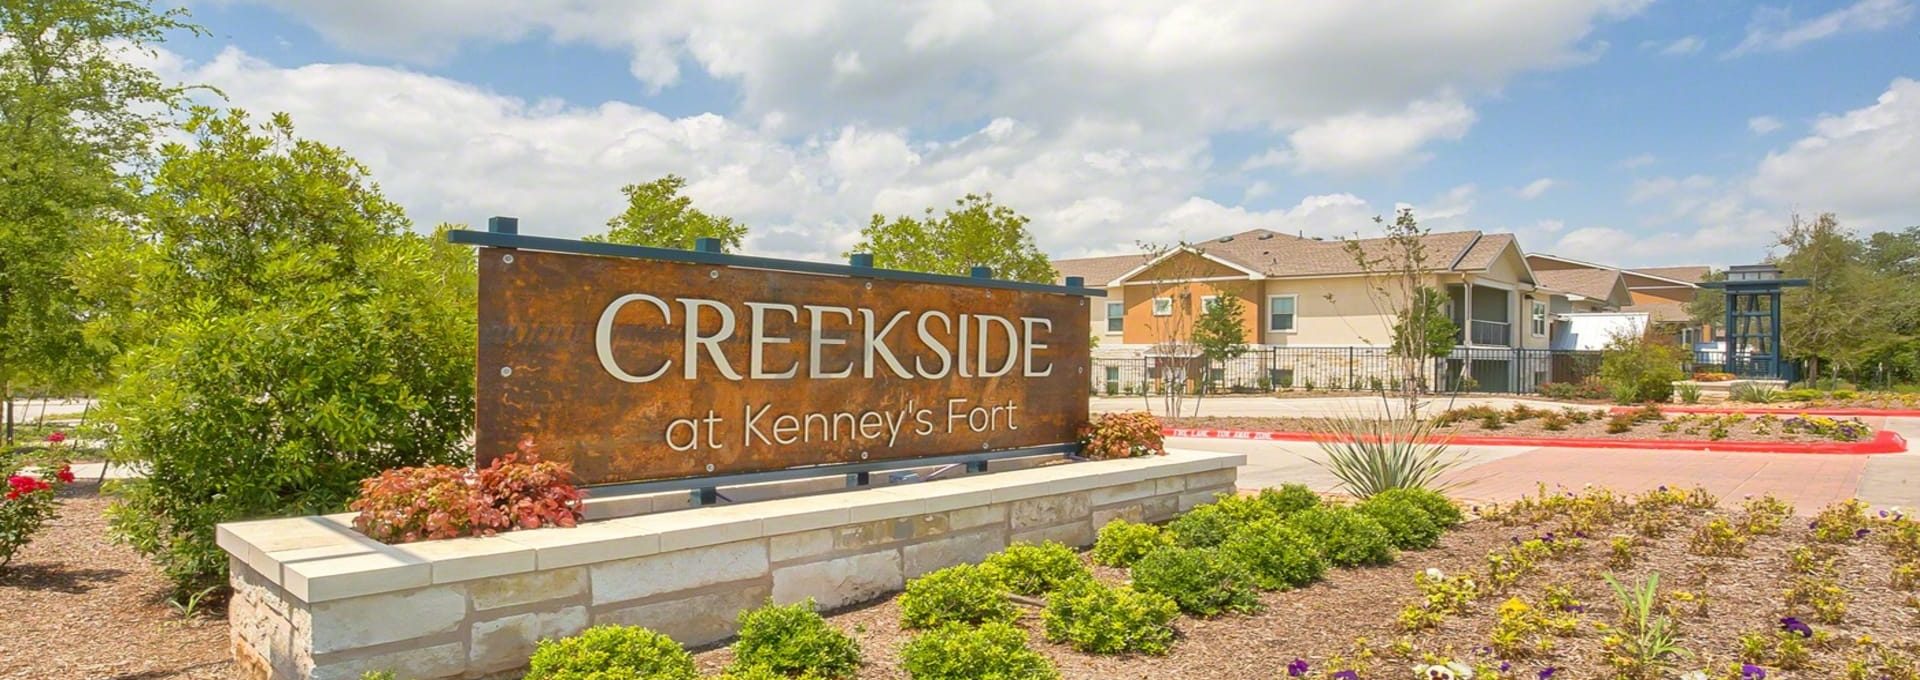 the sign for creekside apartments in the middle of a field at The Creekside at Kenneys Fort